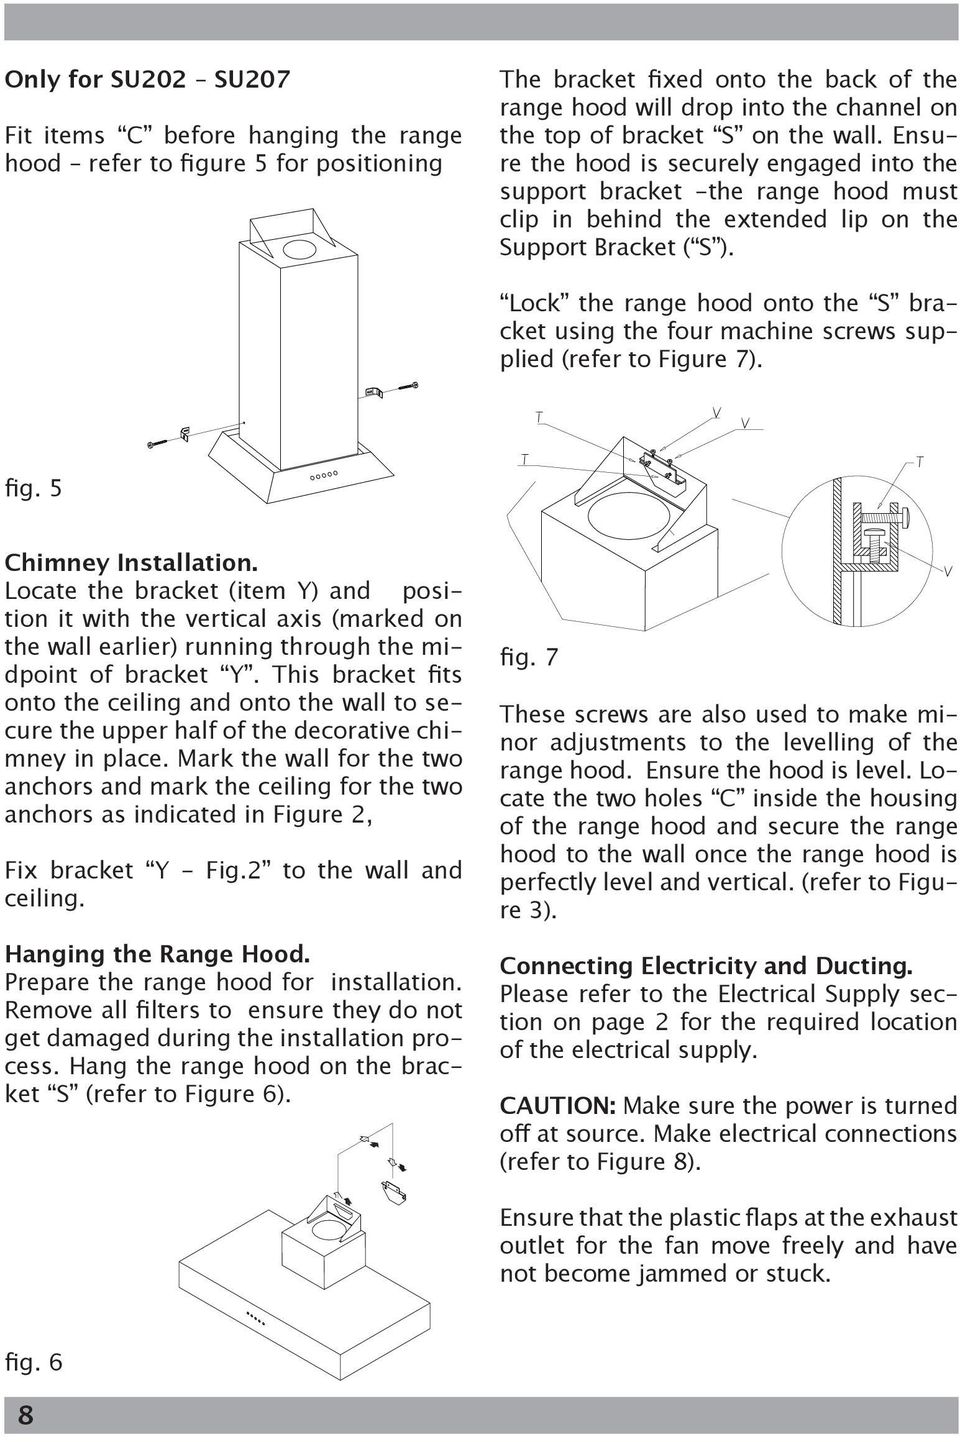 Lock the range hood onto the S bracket using the four machine screws supplied (refer to Figure 7). fig. 5 Chimney Installation.